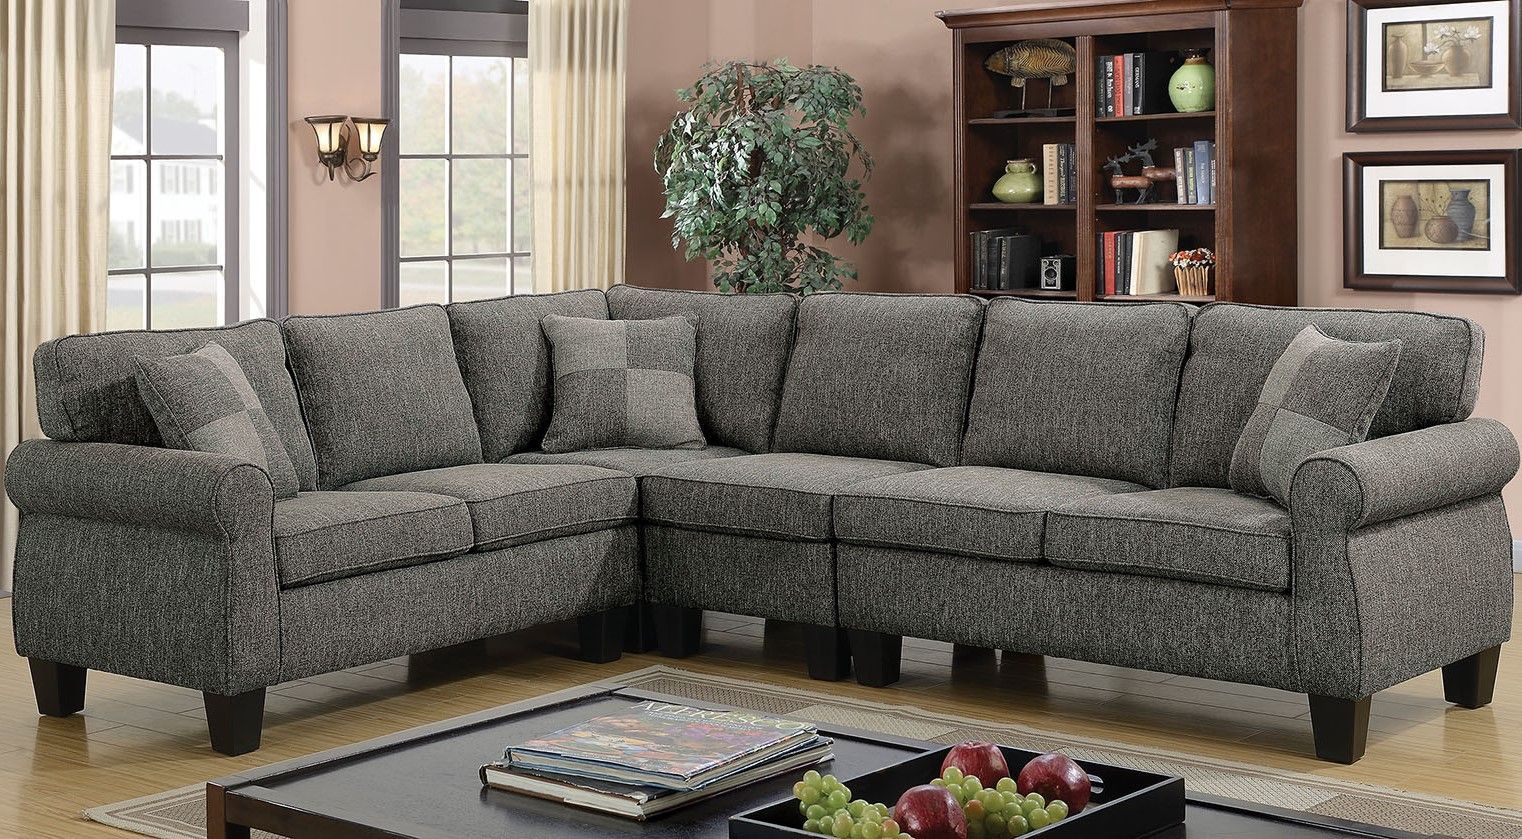 Rhian Transitional Sectional Sofa W/ Pillows In Dark Gray Inside Sectional Sofas In Gray (View 5 of 15)